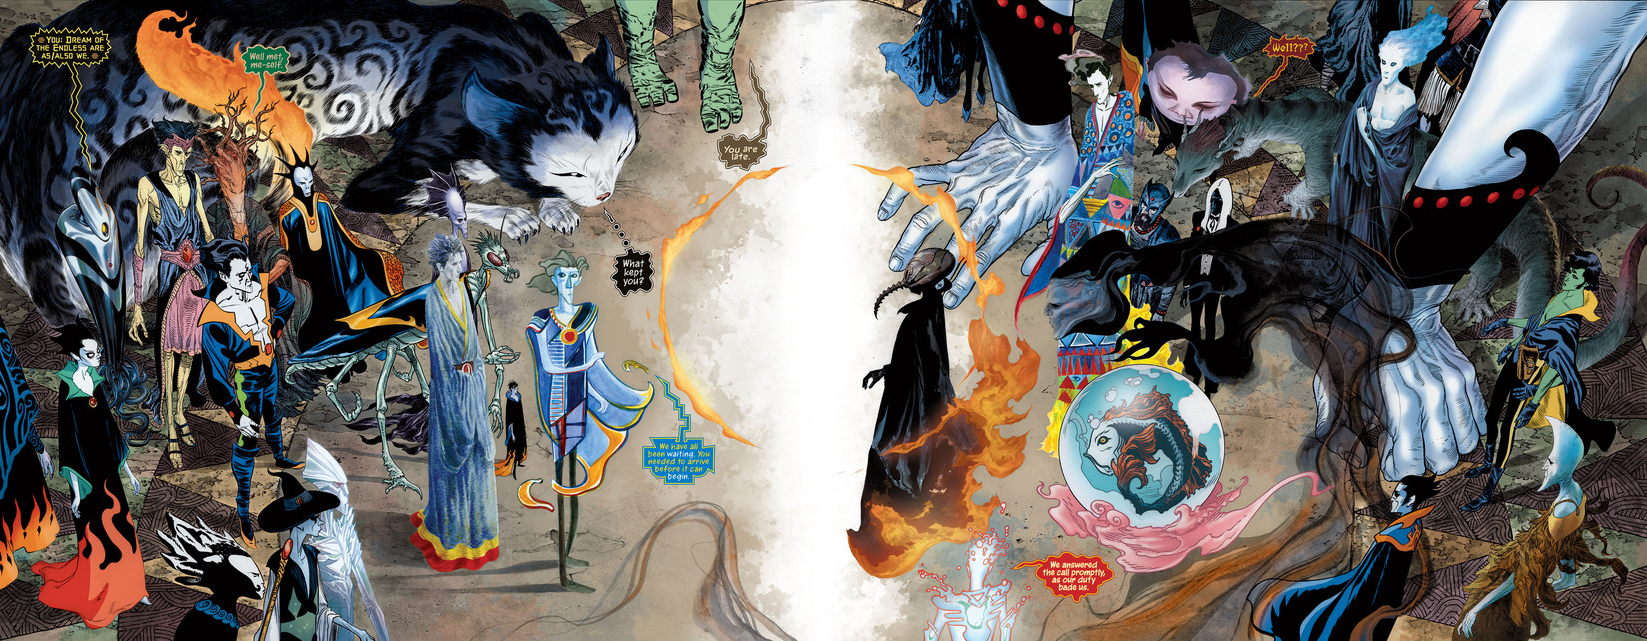 ​Everything You Ever Loved About Neil Gaiman’s Sandman Comes Back Today